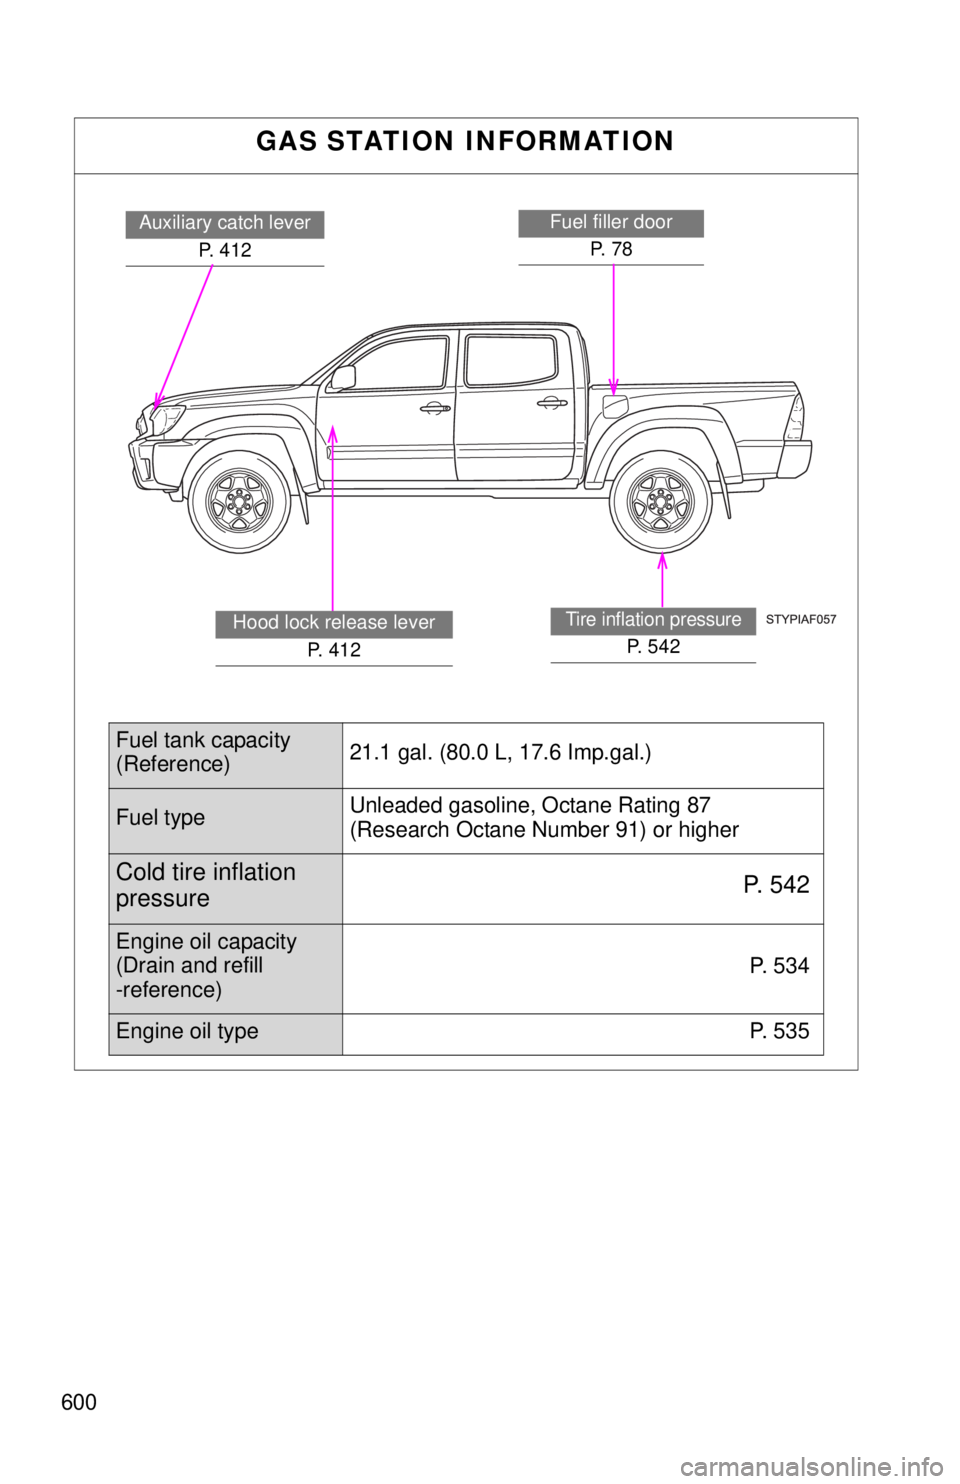 TOYOTA TACOMA 2014  Owners Manual (in English) 600
GAS STATION INFORMATION
Auxiliary catch leverP. 412Fuel filler doorP.  7 8
Tire inflation pressure
P.  5 4 2
Hood lock release lever P.  4 1 2
Fuel tank capacity
(Reference) 21.1 gal. (80.0 L, 17.